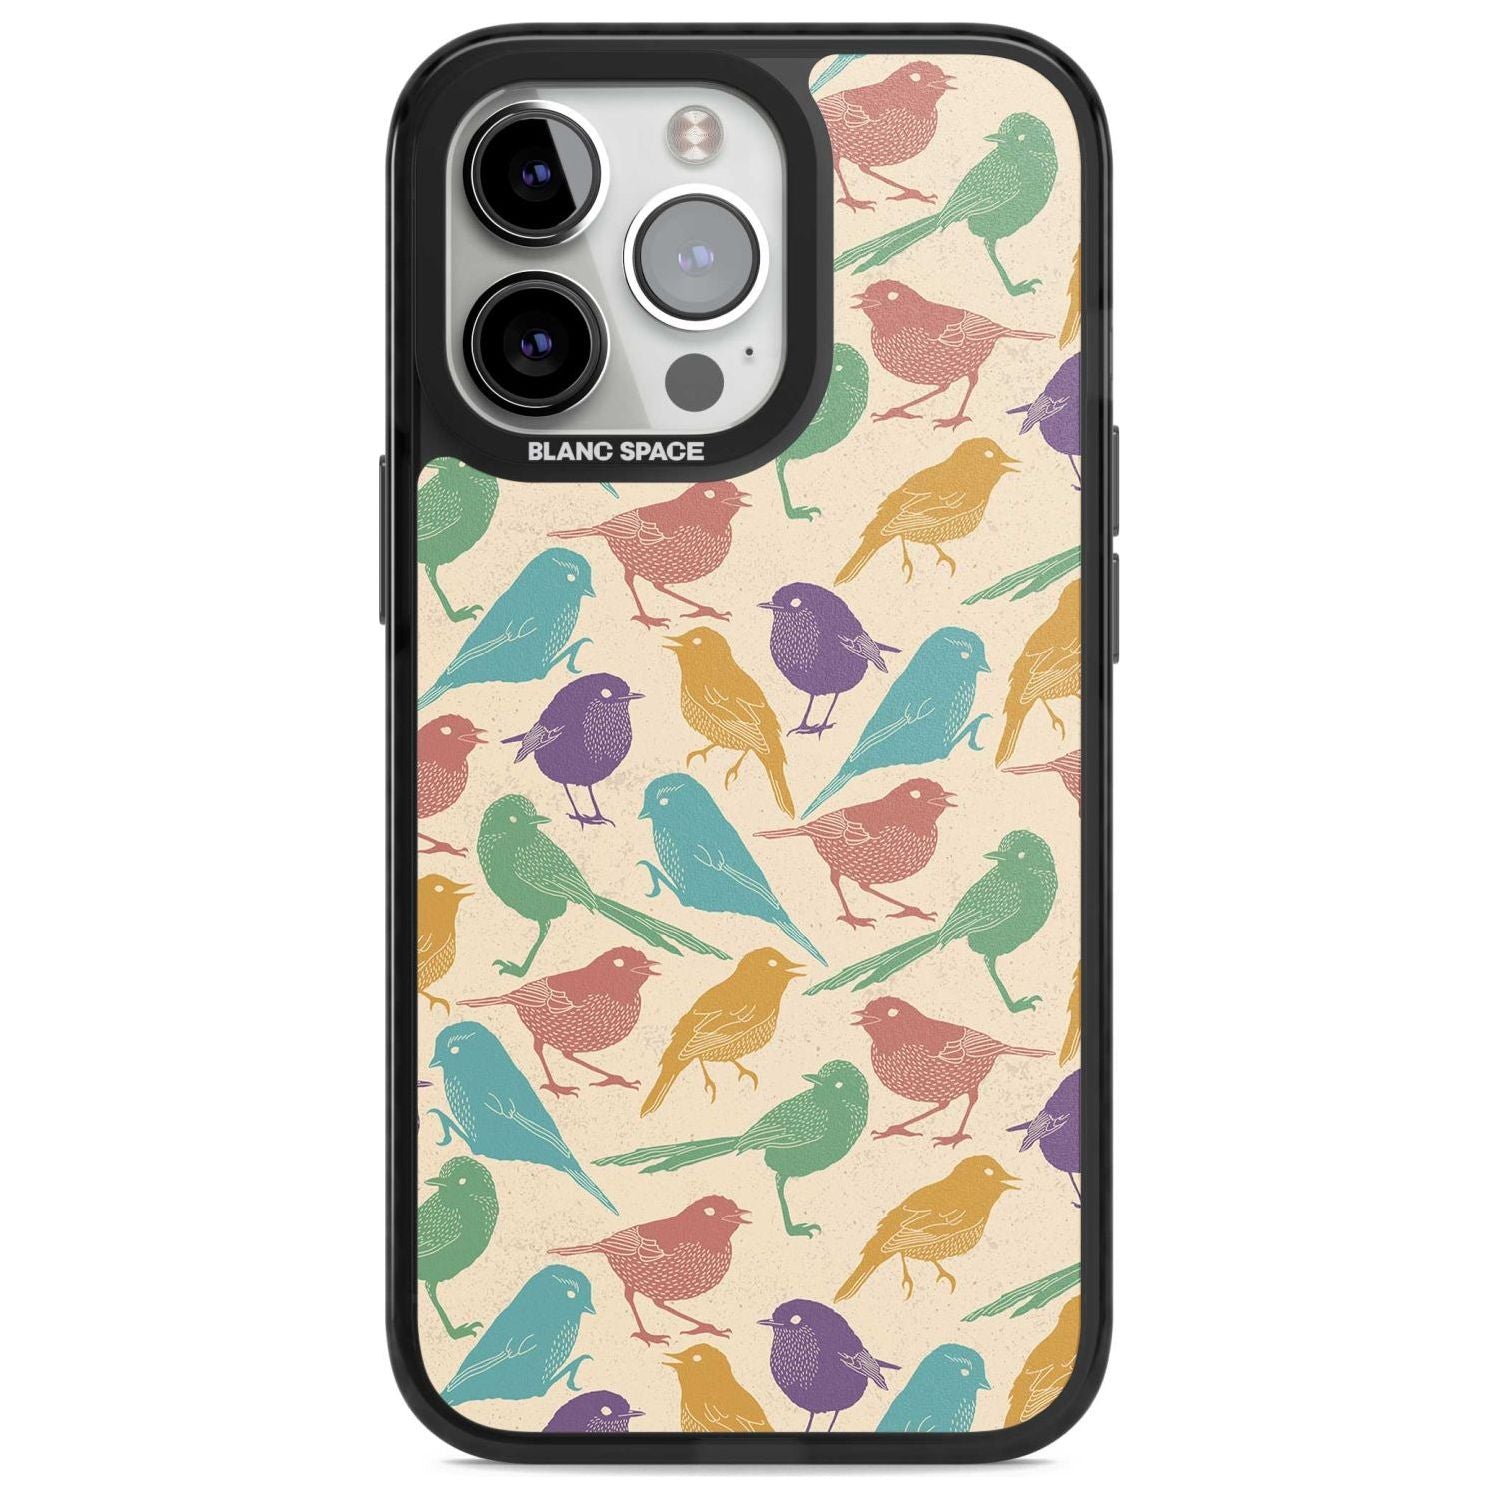 Colourful Feathered Friends Bird Phone Case iPhone 15 Pro Max / Magsafe Black Impact Case,iPhone 15 Pro / Magsafe Black Impact Case,iPhone 14 Pro Max / Magsafe Black Impact Case,iPhone 14 Pro / Magsafe Black Impact Case,iPhone 13 Pro / Magsafe Black Impact Case Blanc Space